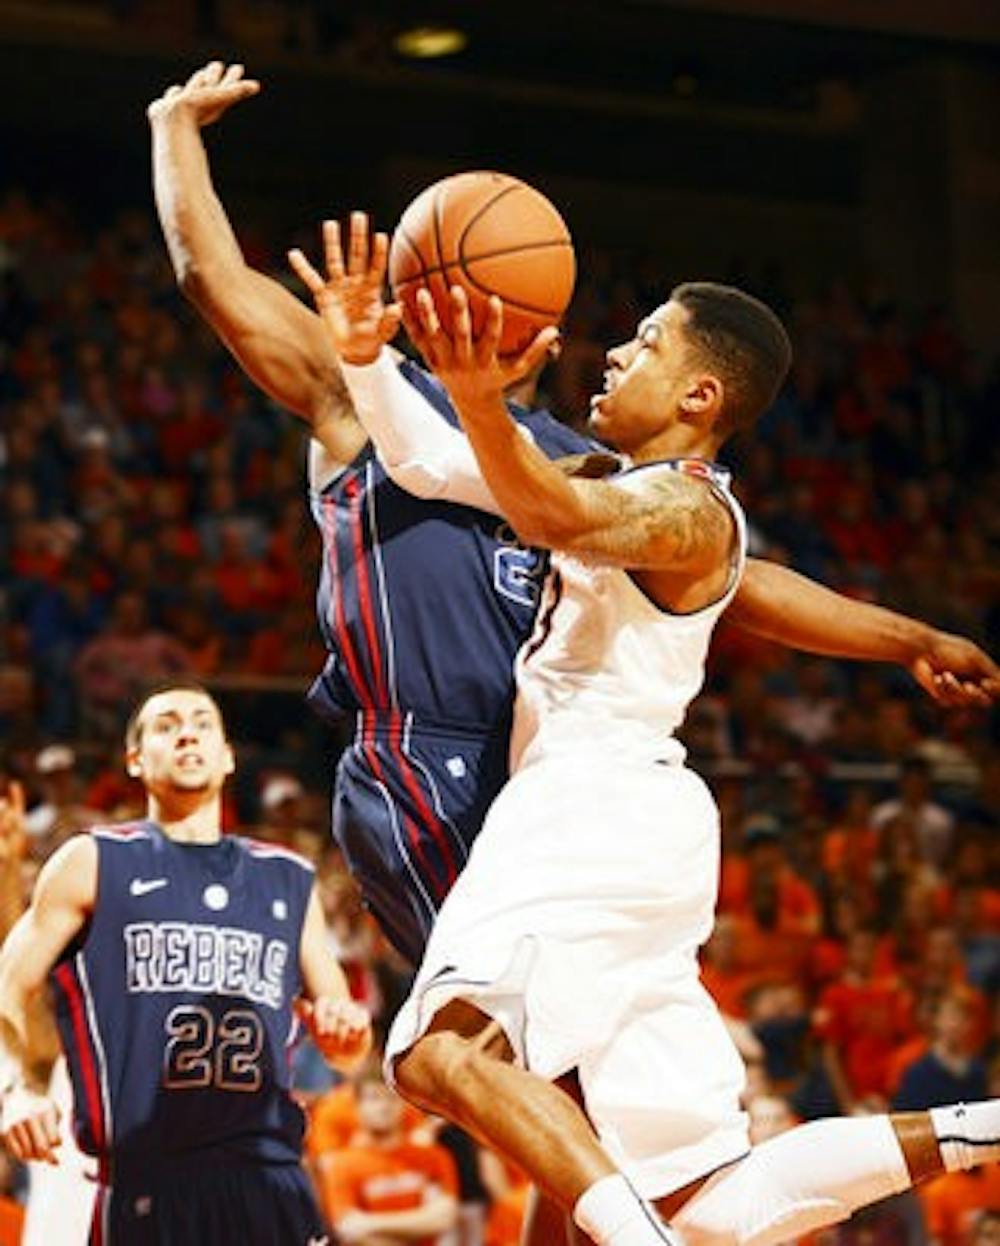 Chris Denson attempts a layup against Ole Miss Saturday, Jan. 26. (Courtesy of Todd Van Emst)